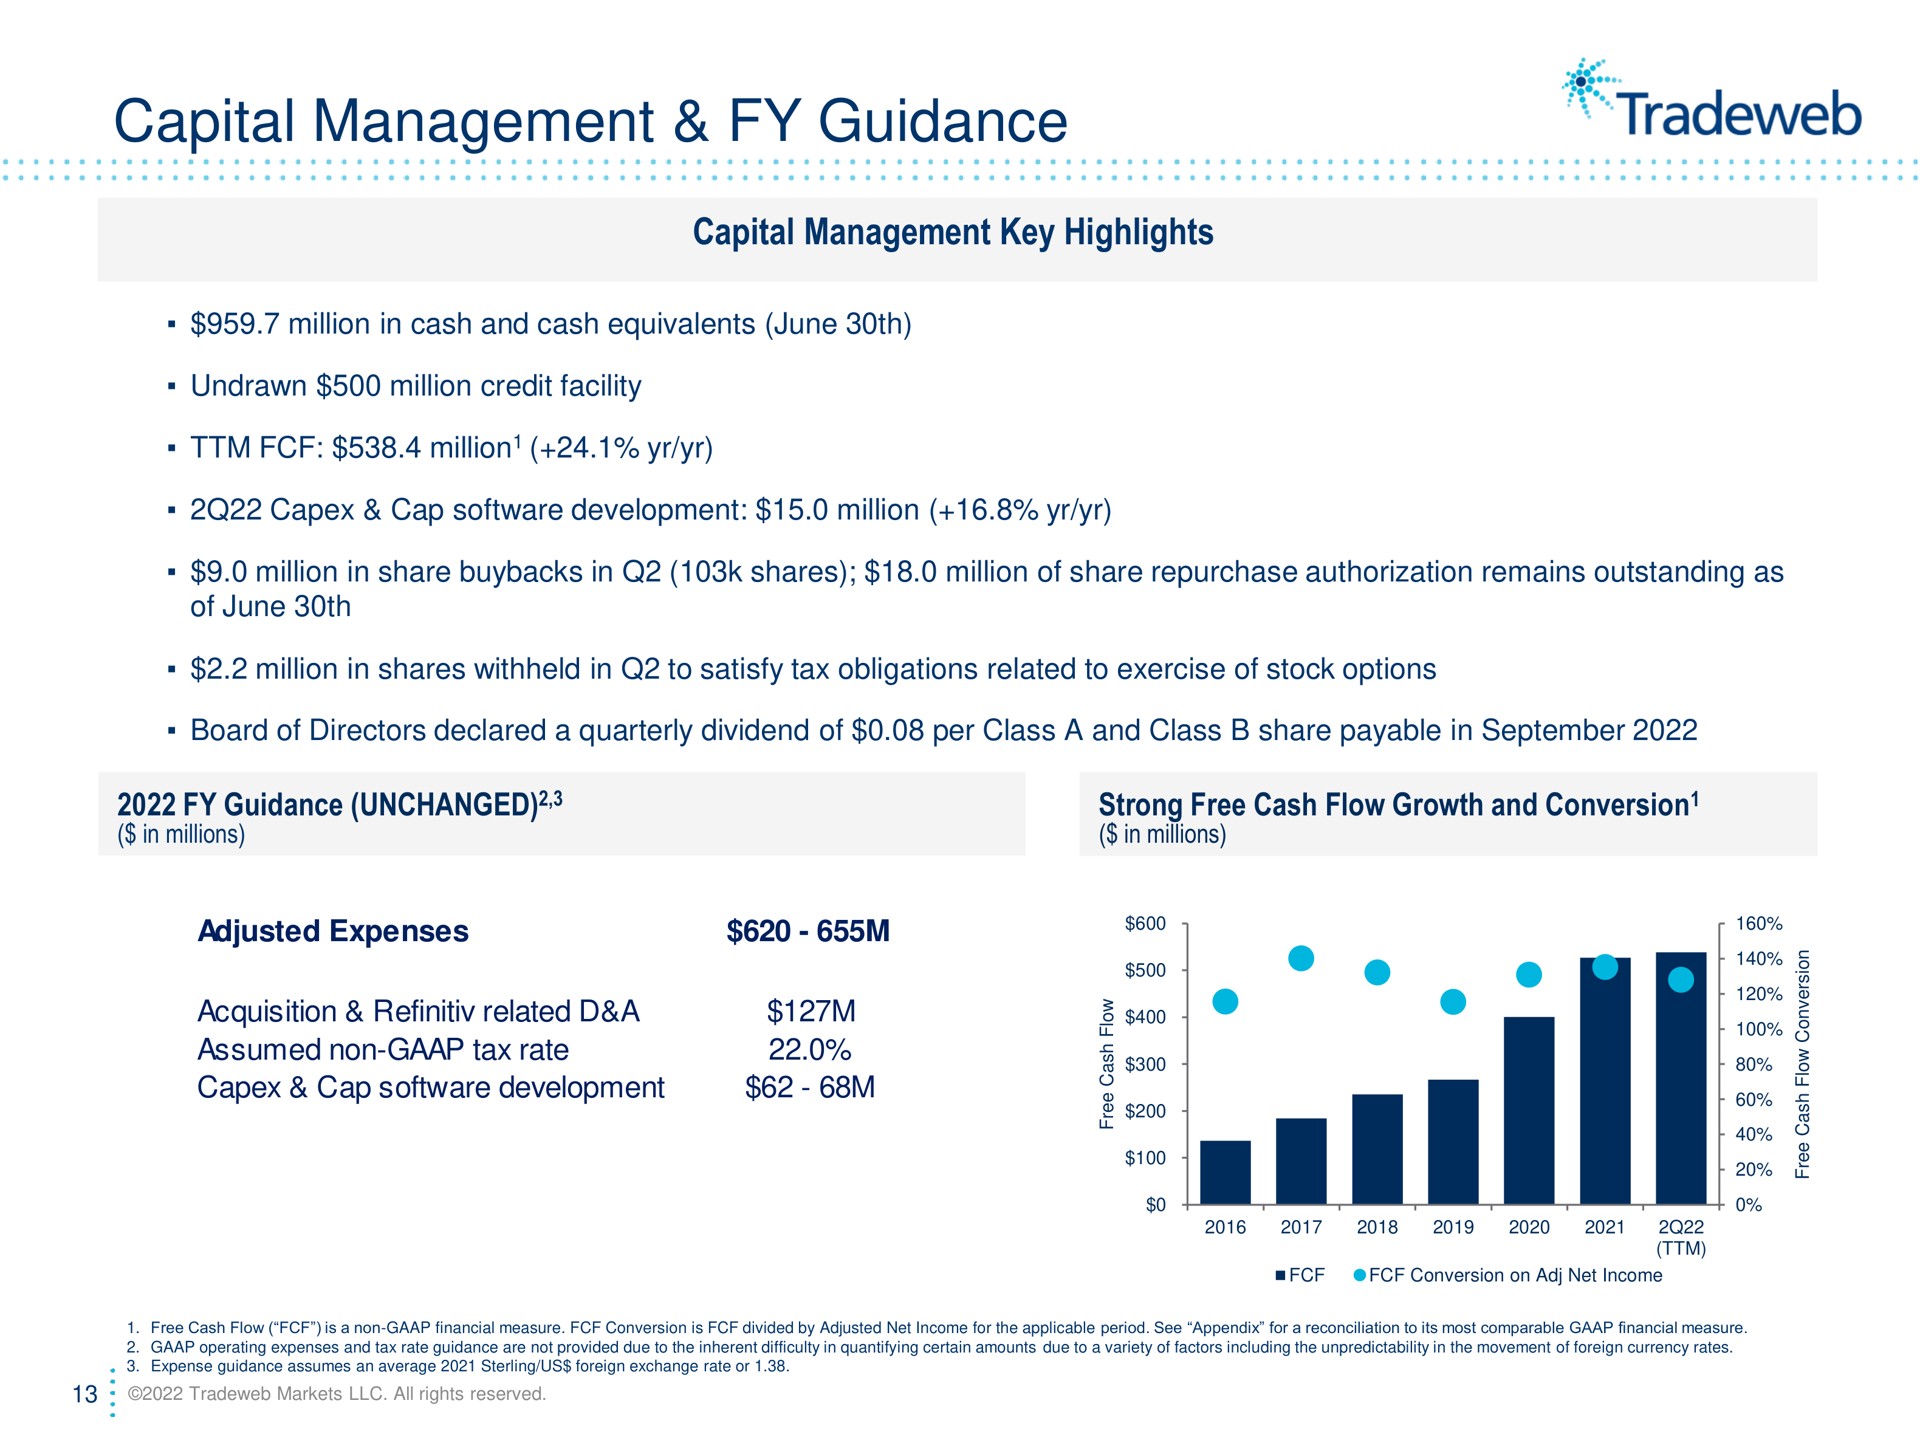 capital management guidance capital management key highlights guidance unchanged strong free cash flow growth and conversion acquisition related a on | Tradeweb